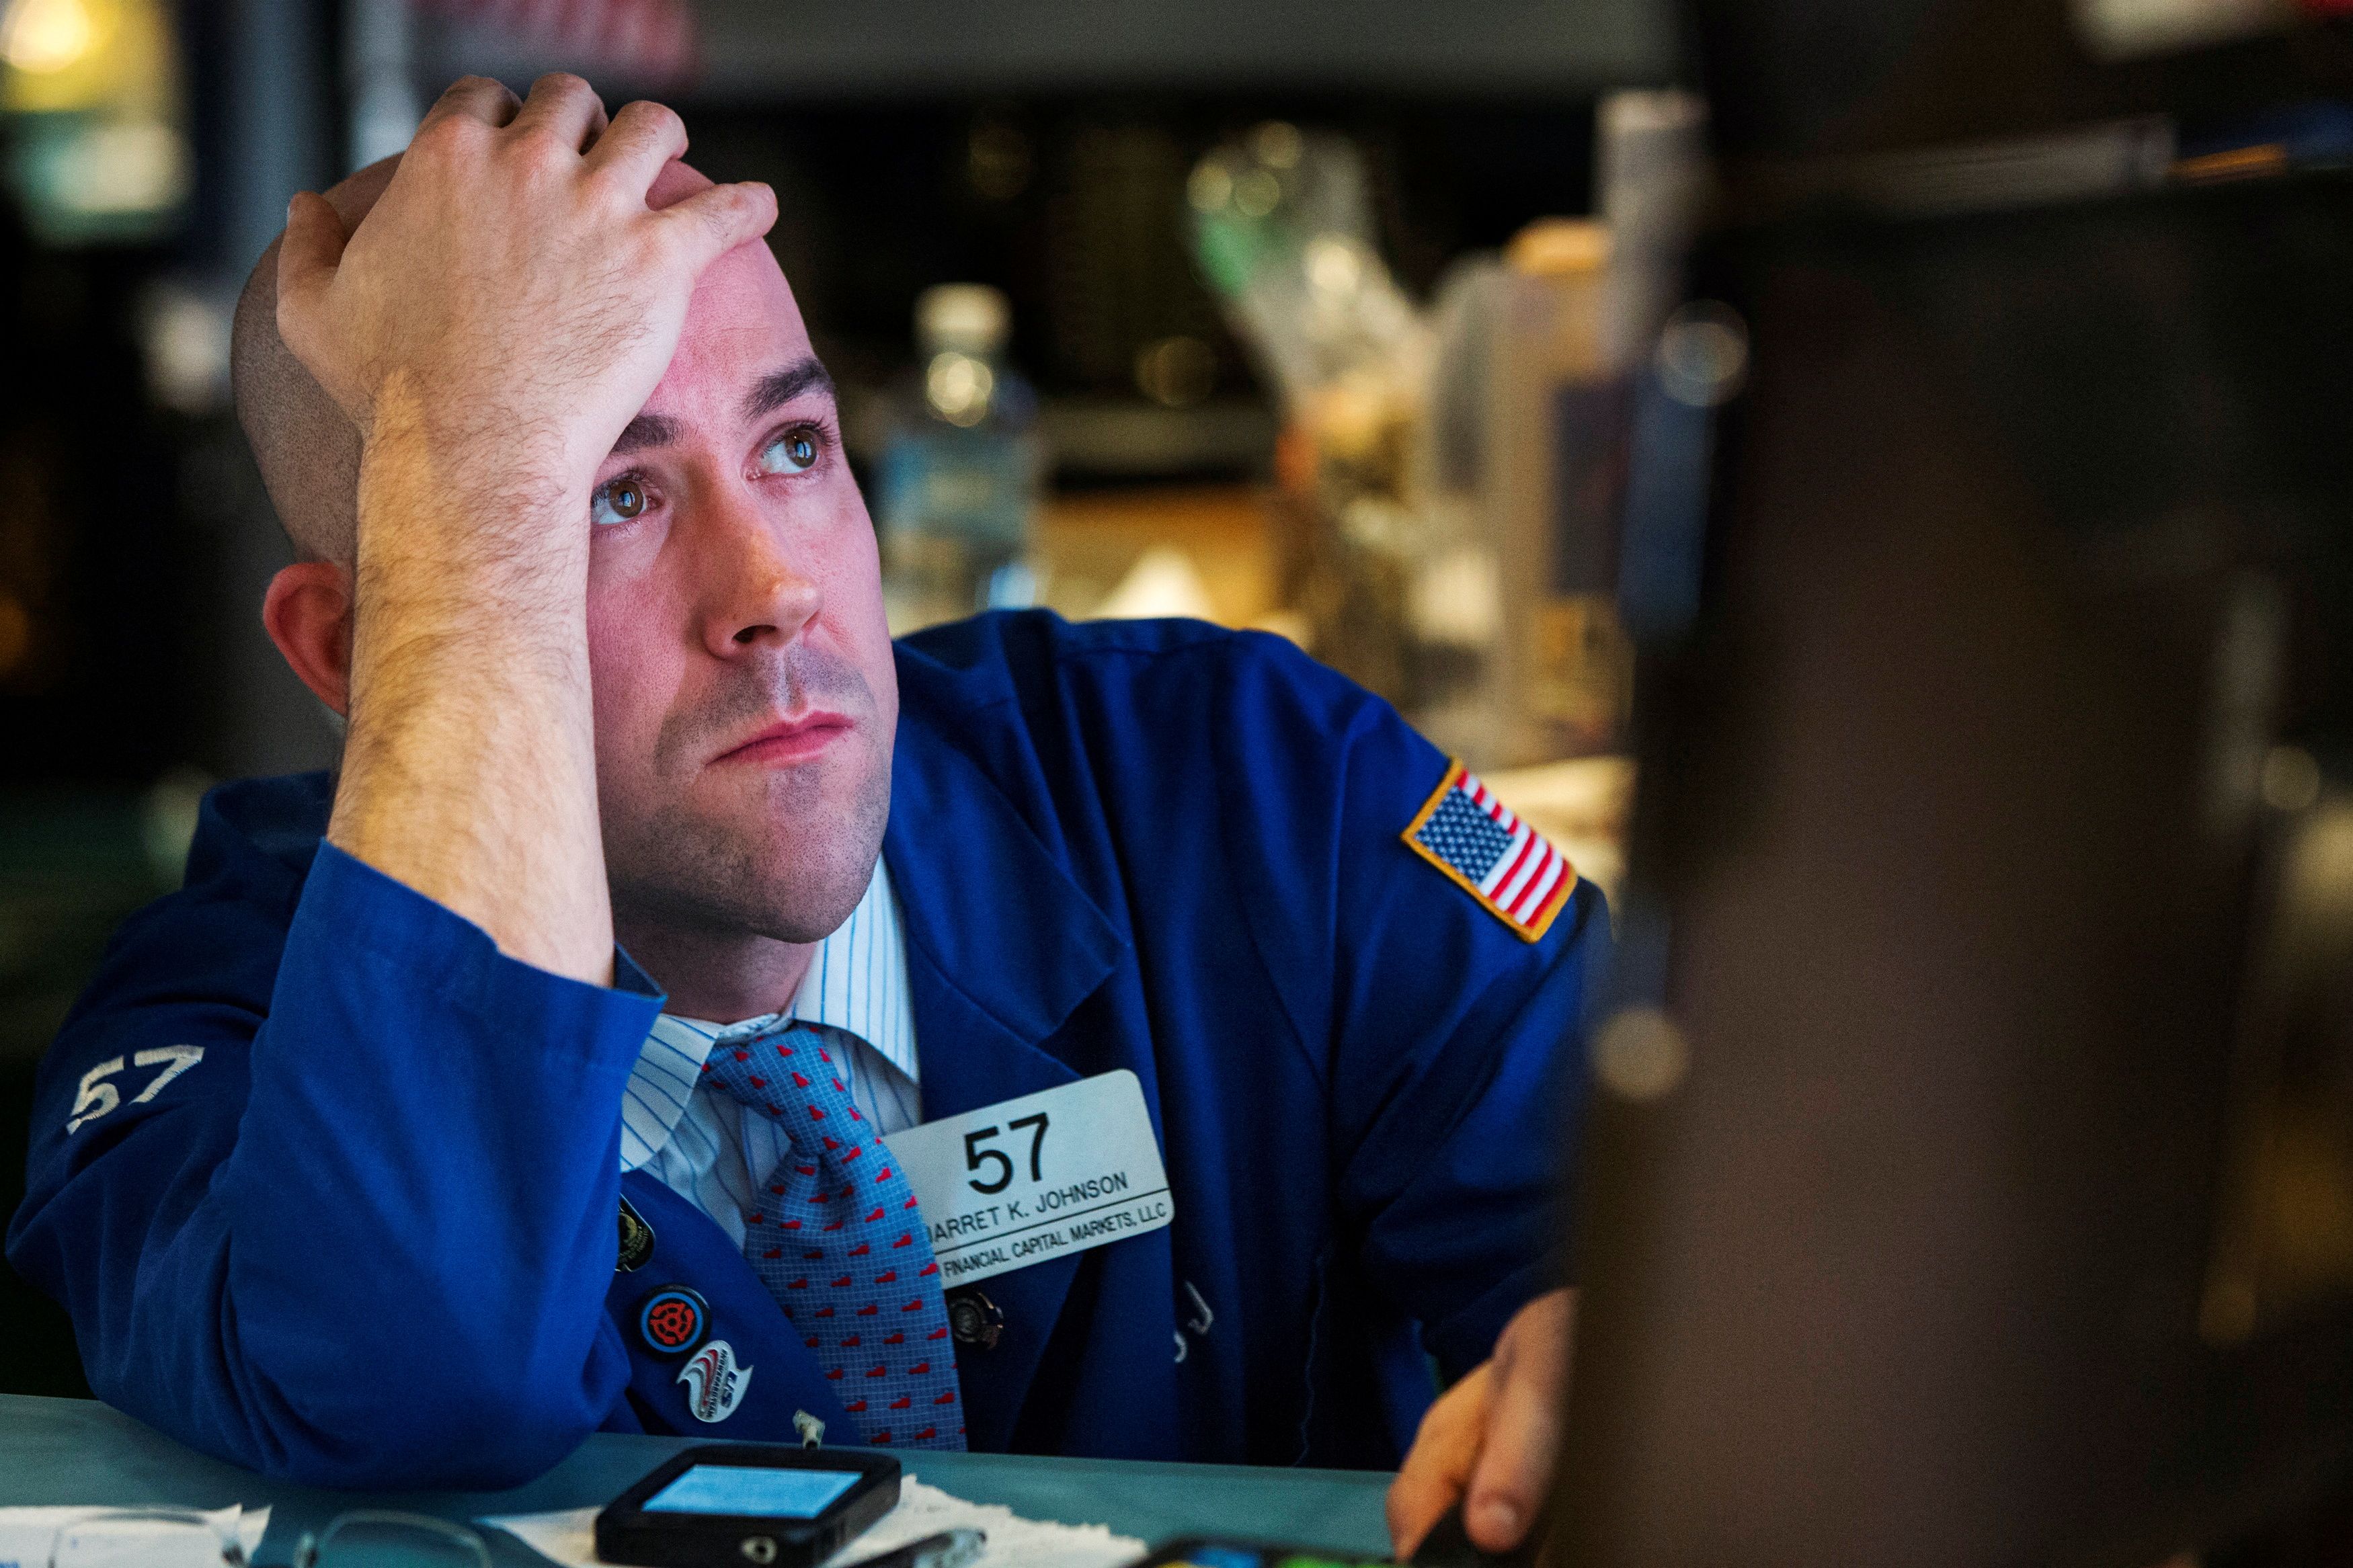 A trader watches the screen at his terminal on the floor of the New York Stock Exchange in New York